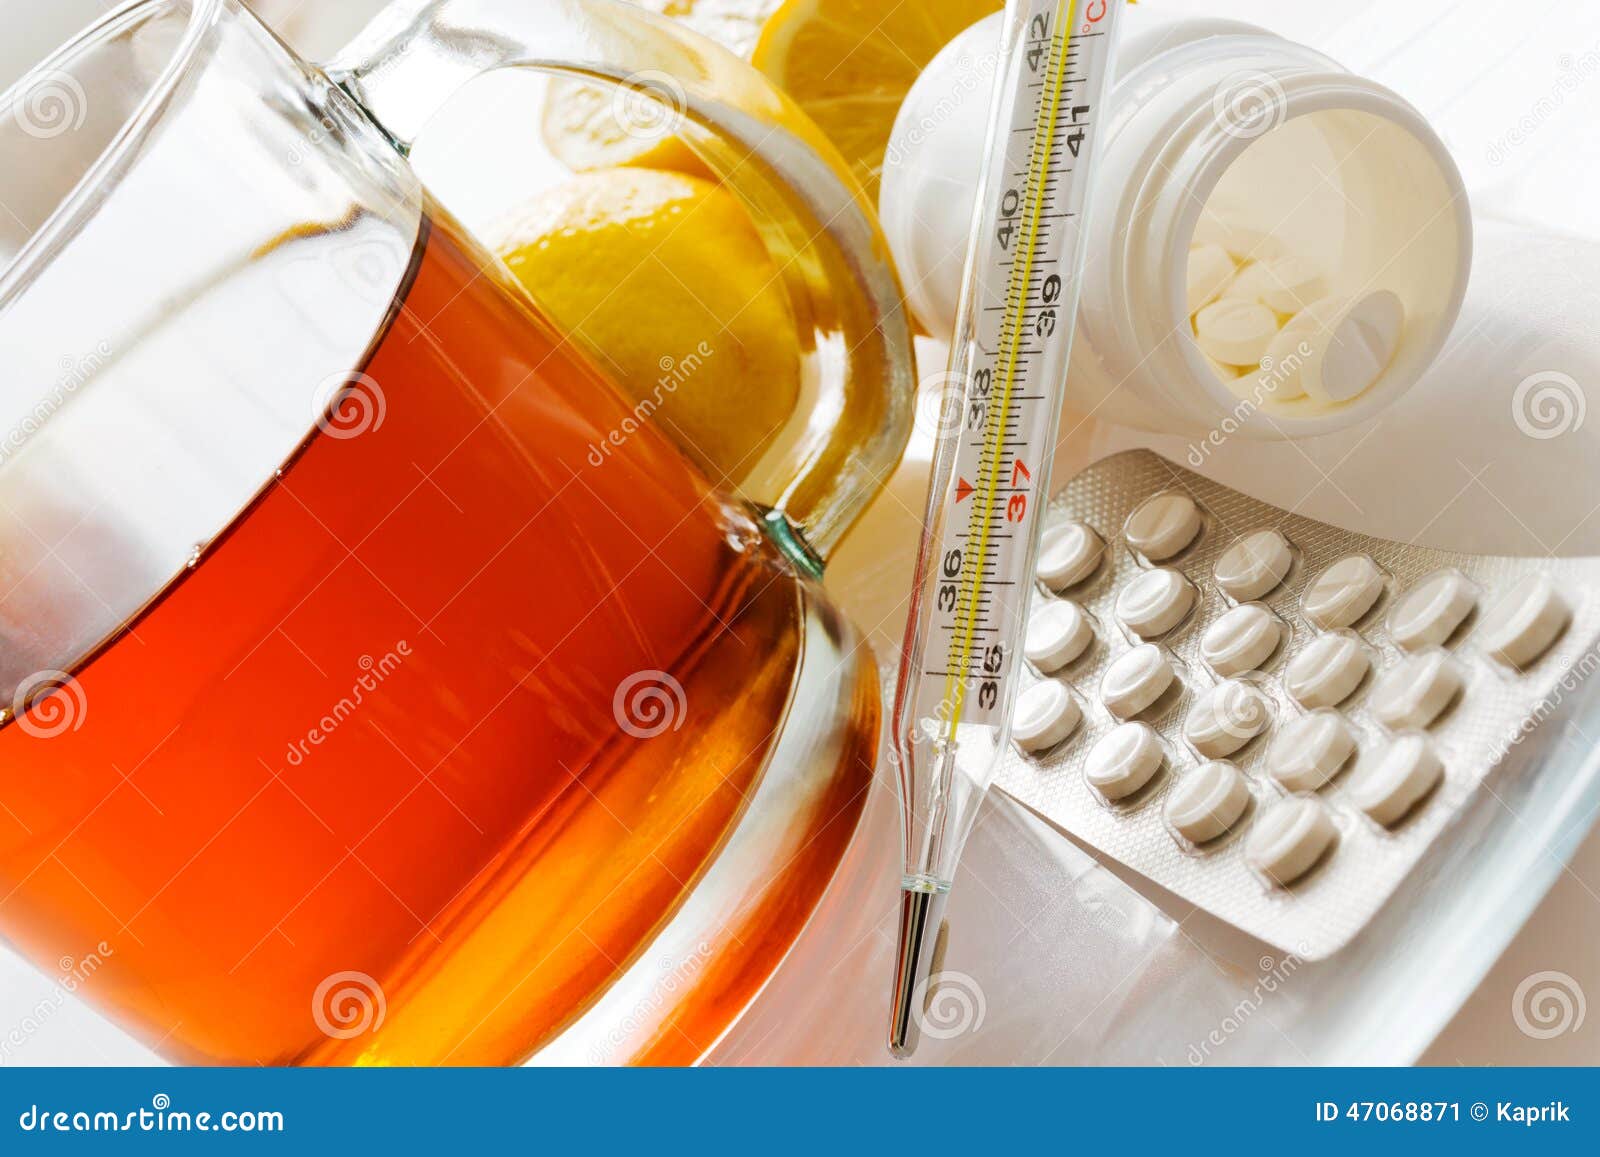 tea with lemons and flu pills with thermometer - grippe remedy